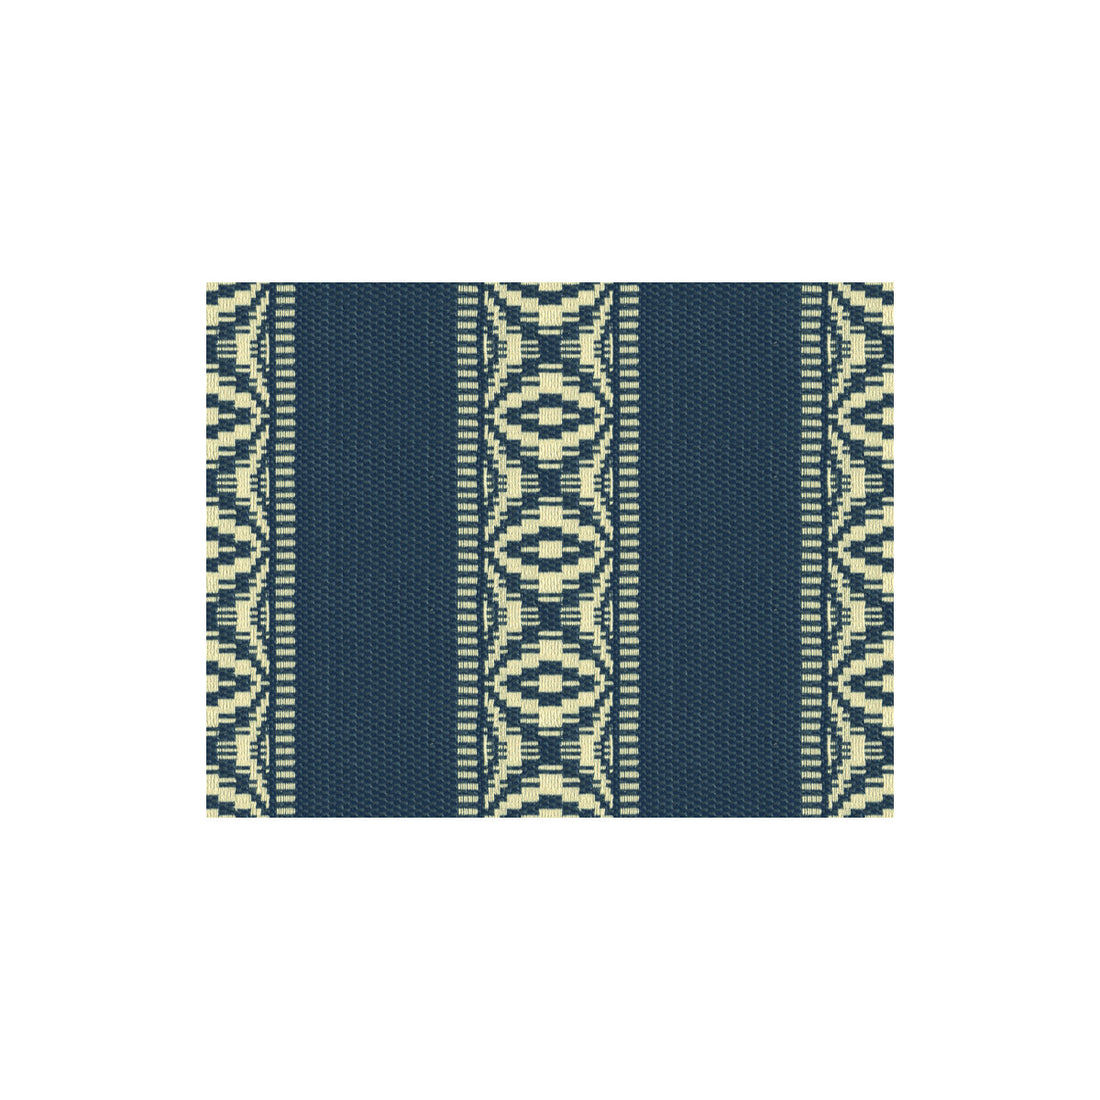 Nautica Stripe fabric in sapphire color - pattern 31942.5.0 - by Kravet Design in the Oceania Indoor Outdoor collection